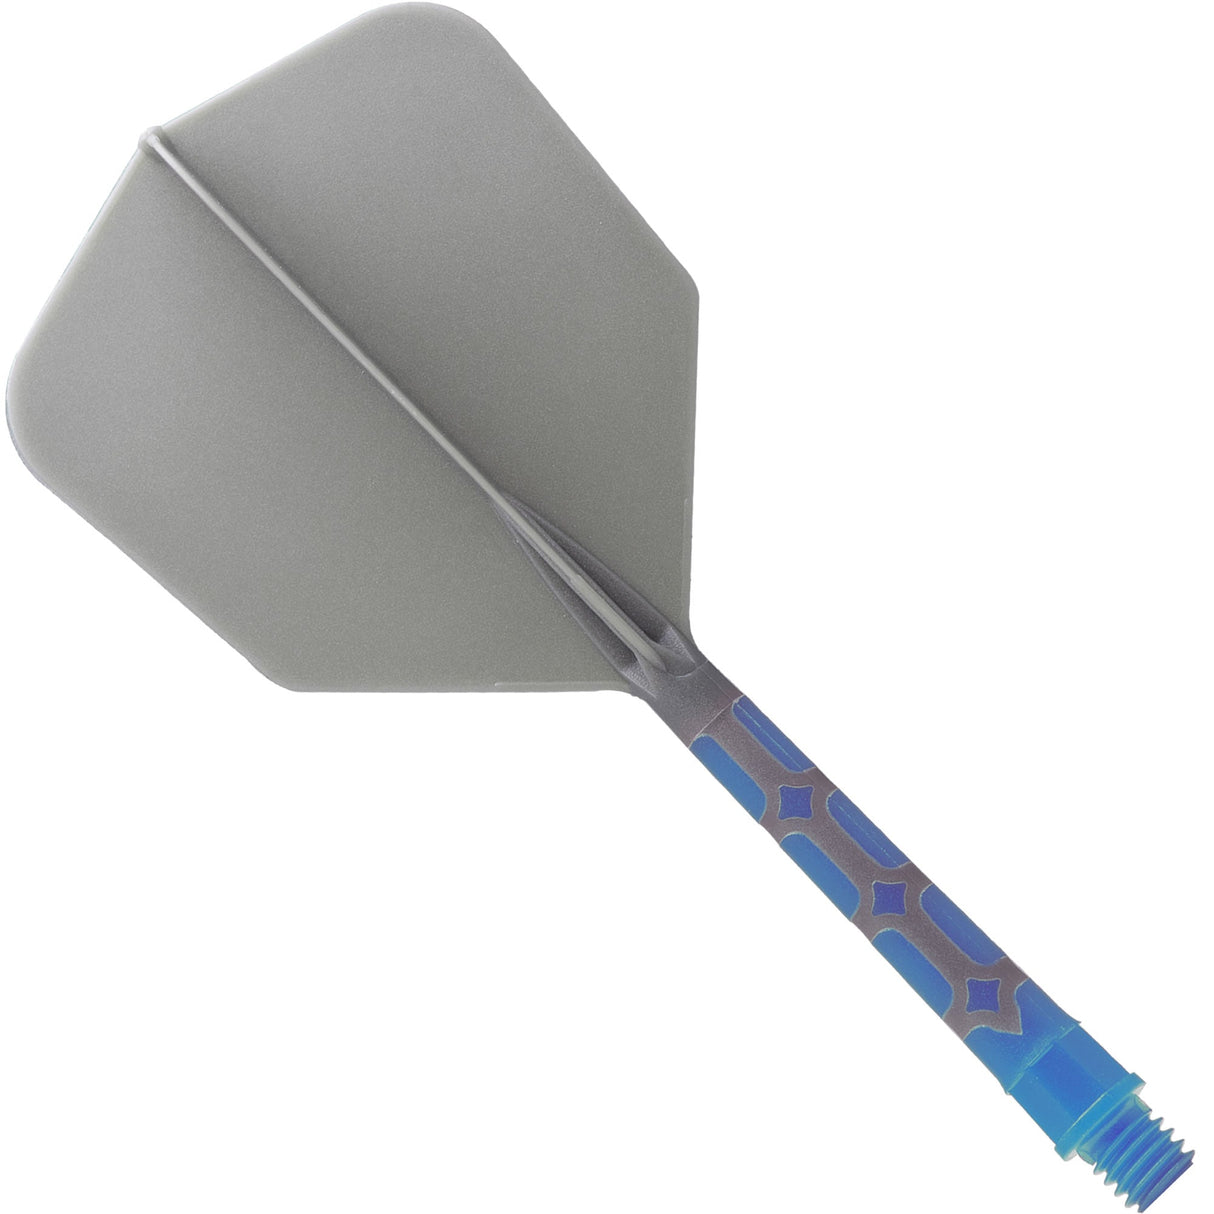 Cuesoul Rost T19 Integrated Dart Shaft and Flights - Big Wing - Sky Blue with Grey Flight Long